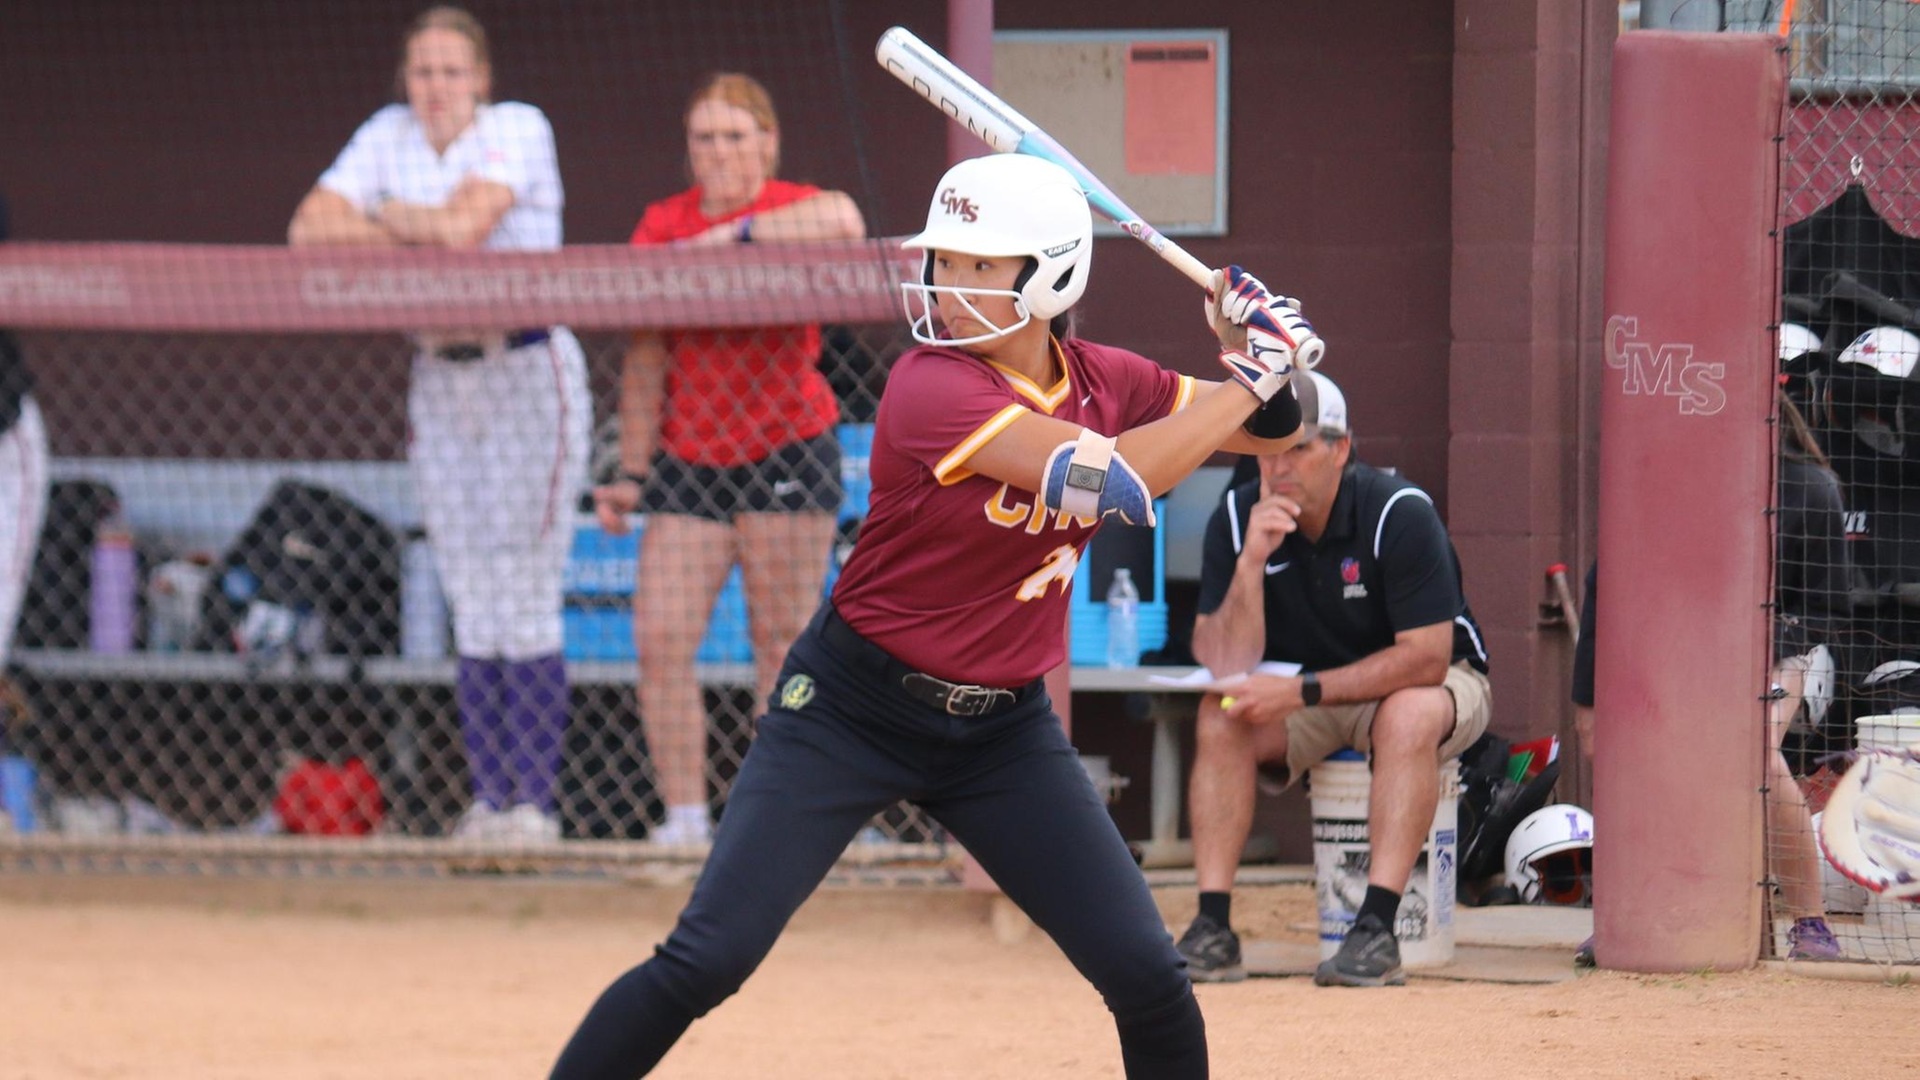 Giselle Lai was 5-for-8 in the doubleheader (photo by Abbie Bobeck)